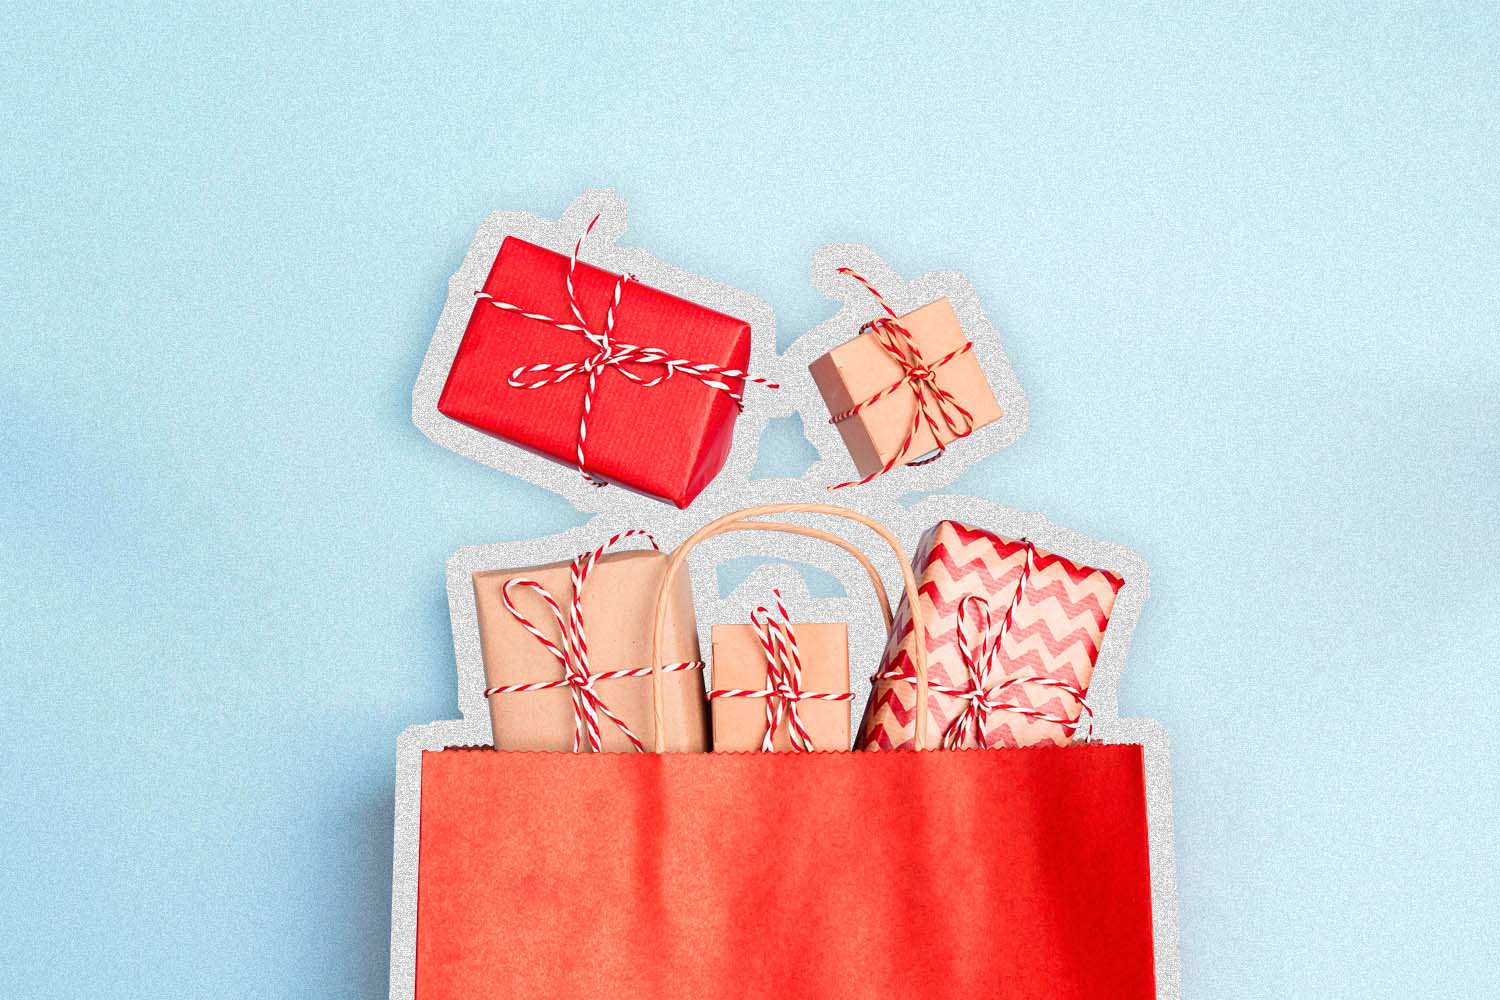 Red boxes in a red giftbag